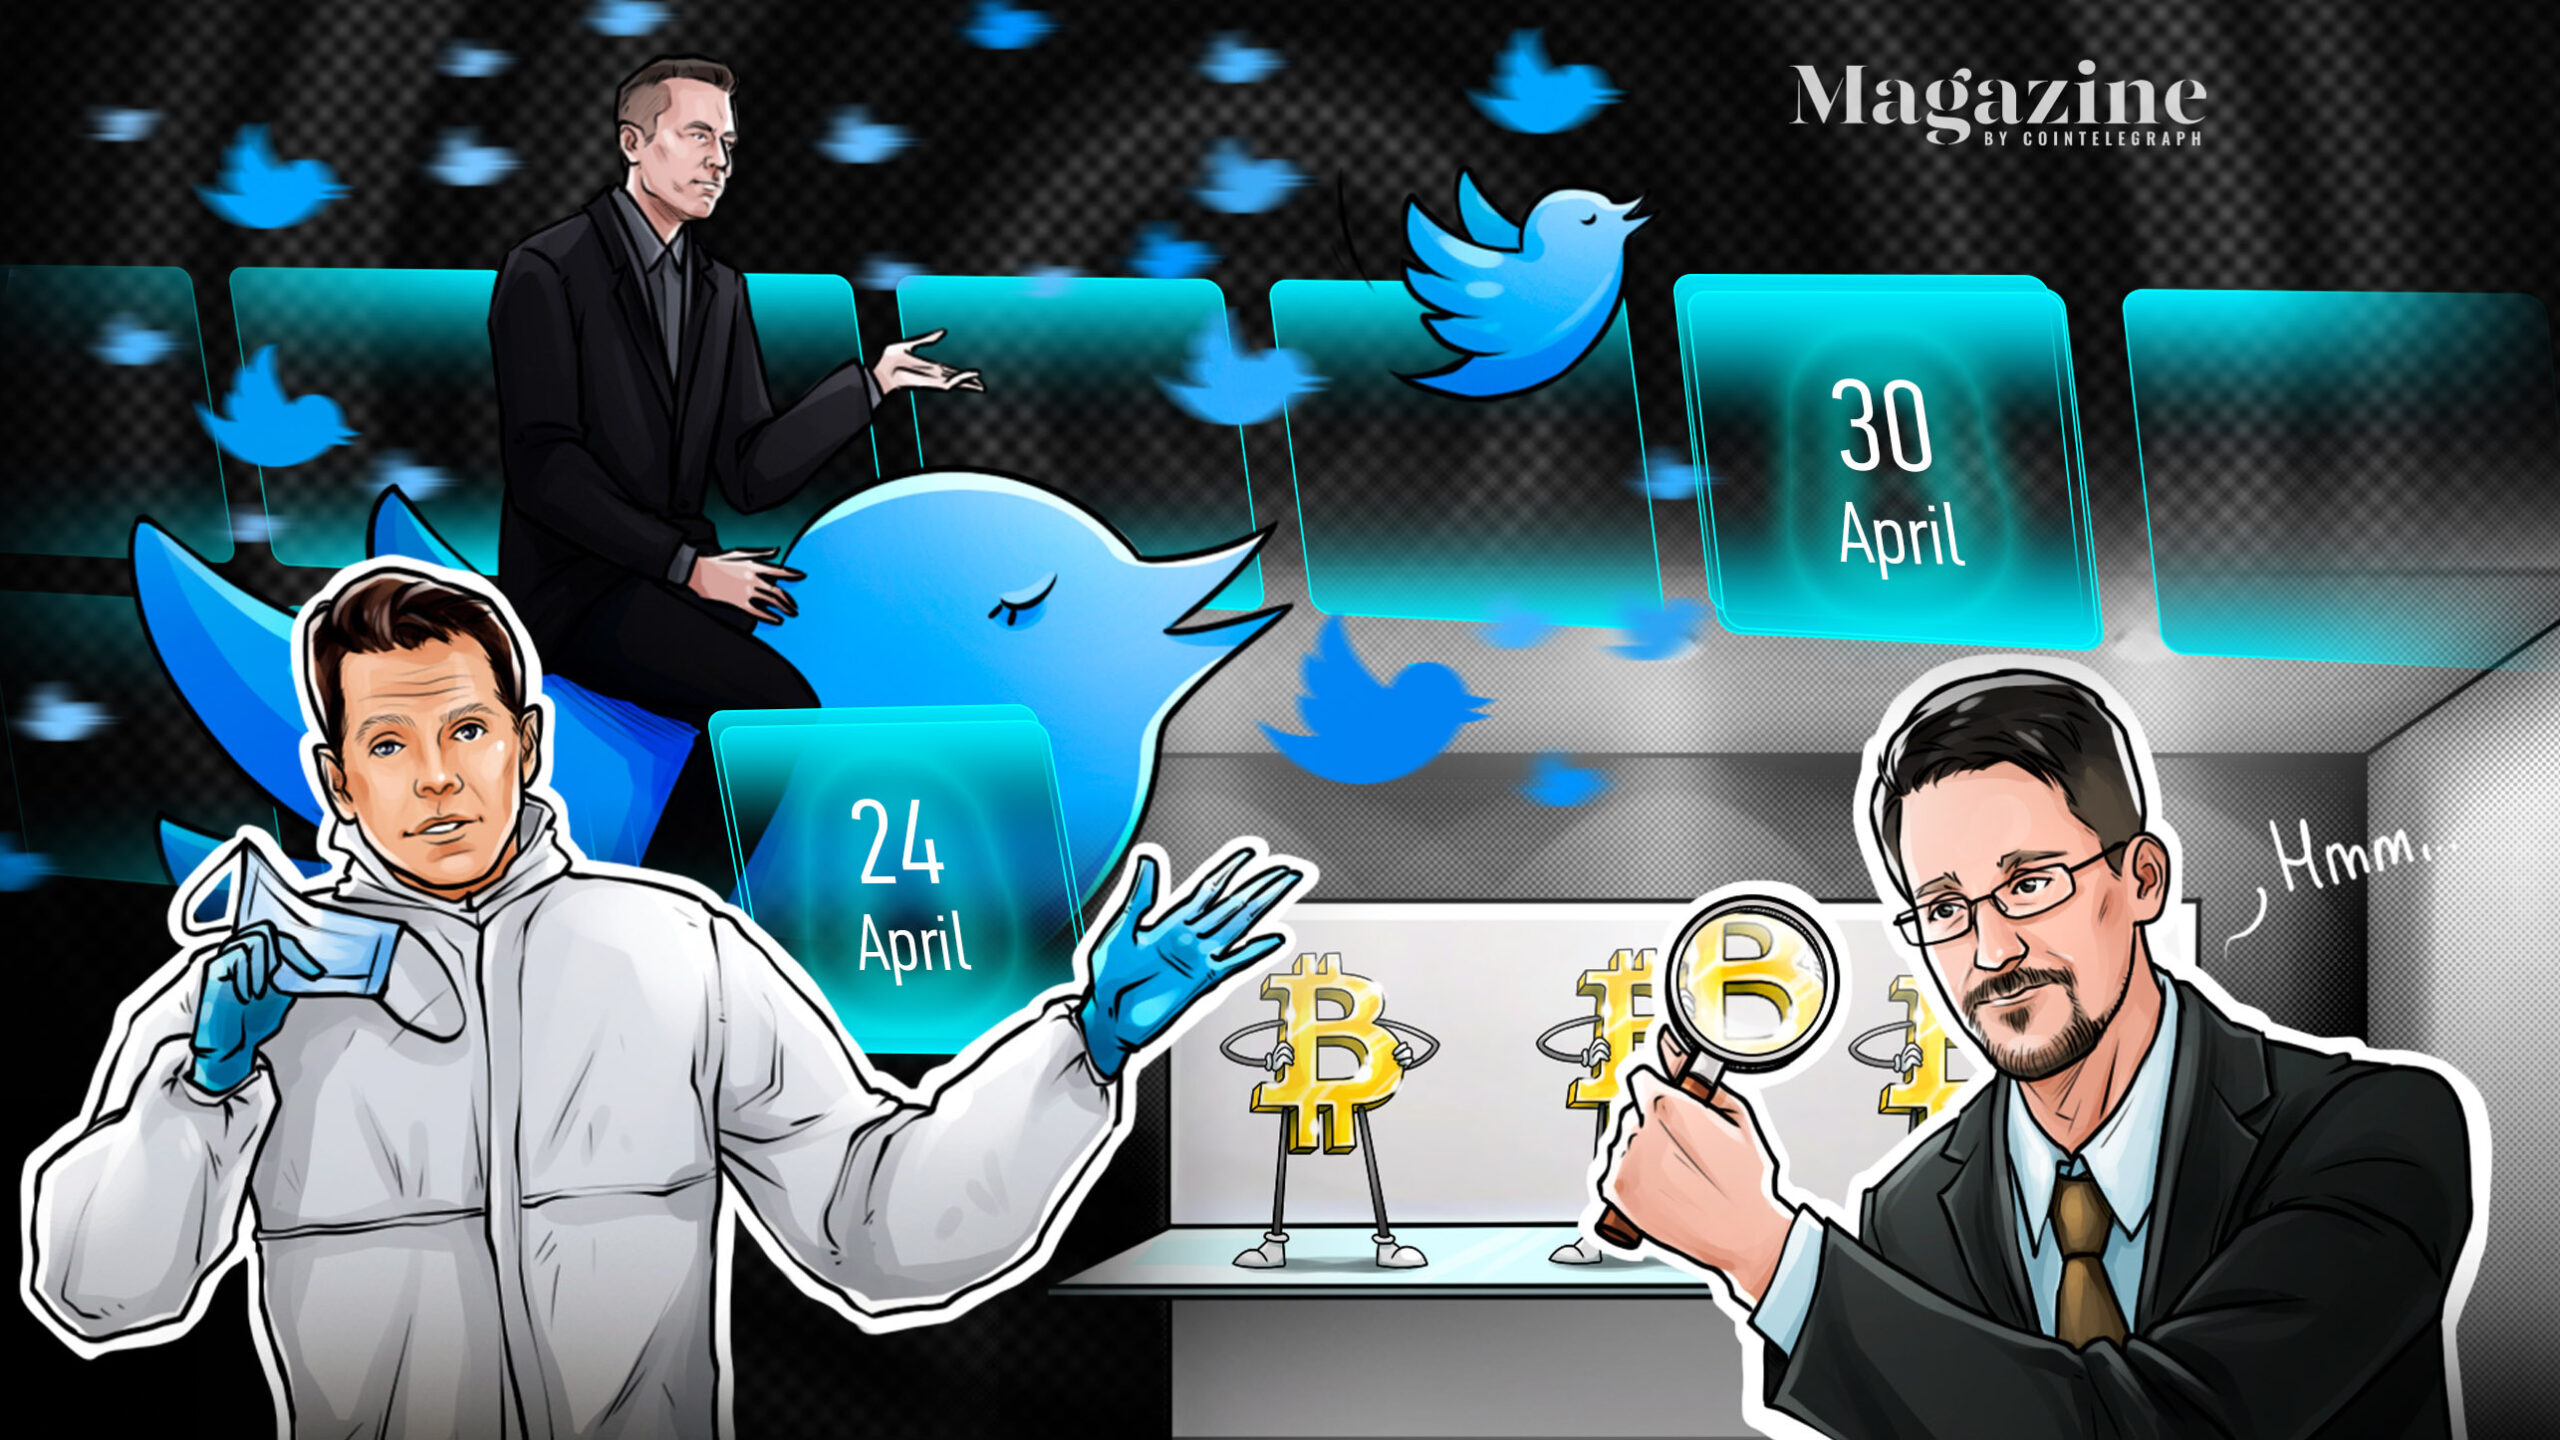 Meta-to-launch-metaverse-hardware-store,-elon-musk-buys-twitter-for-$44b-and-apecoin-pumps-to-new-highs:-hodler’s-digest,-april-24-30